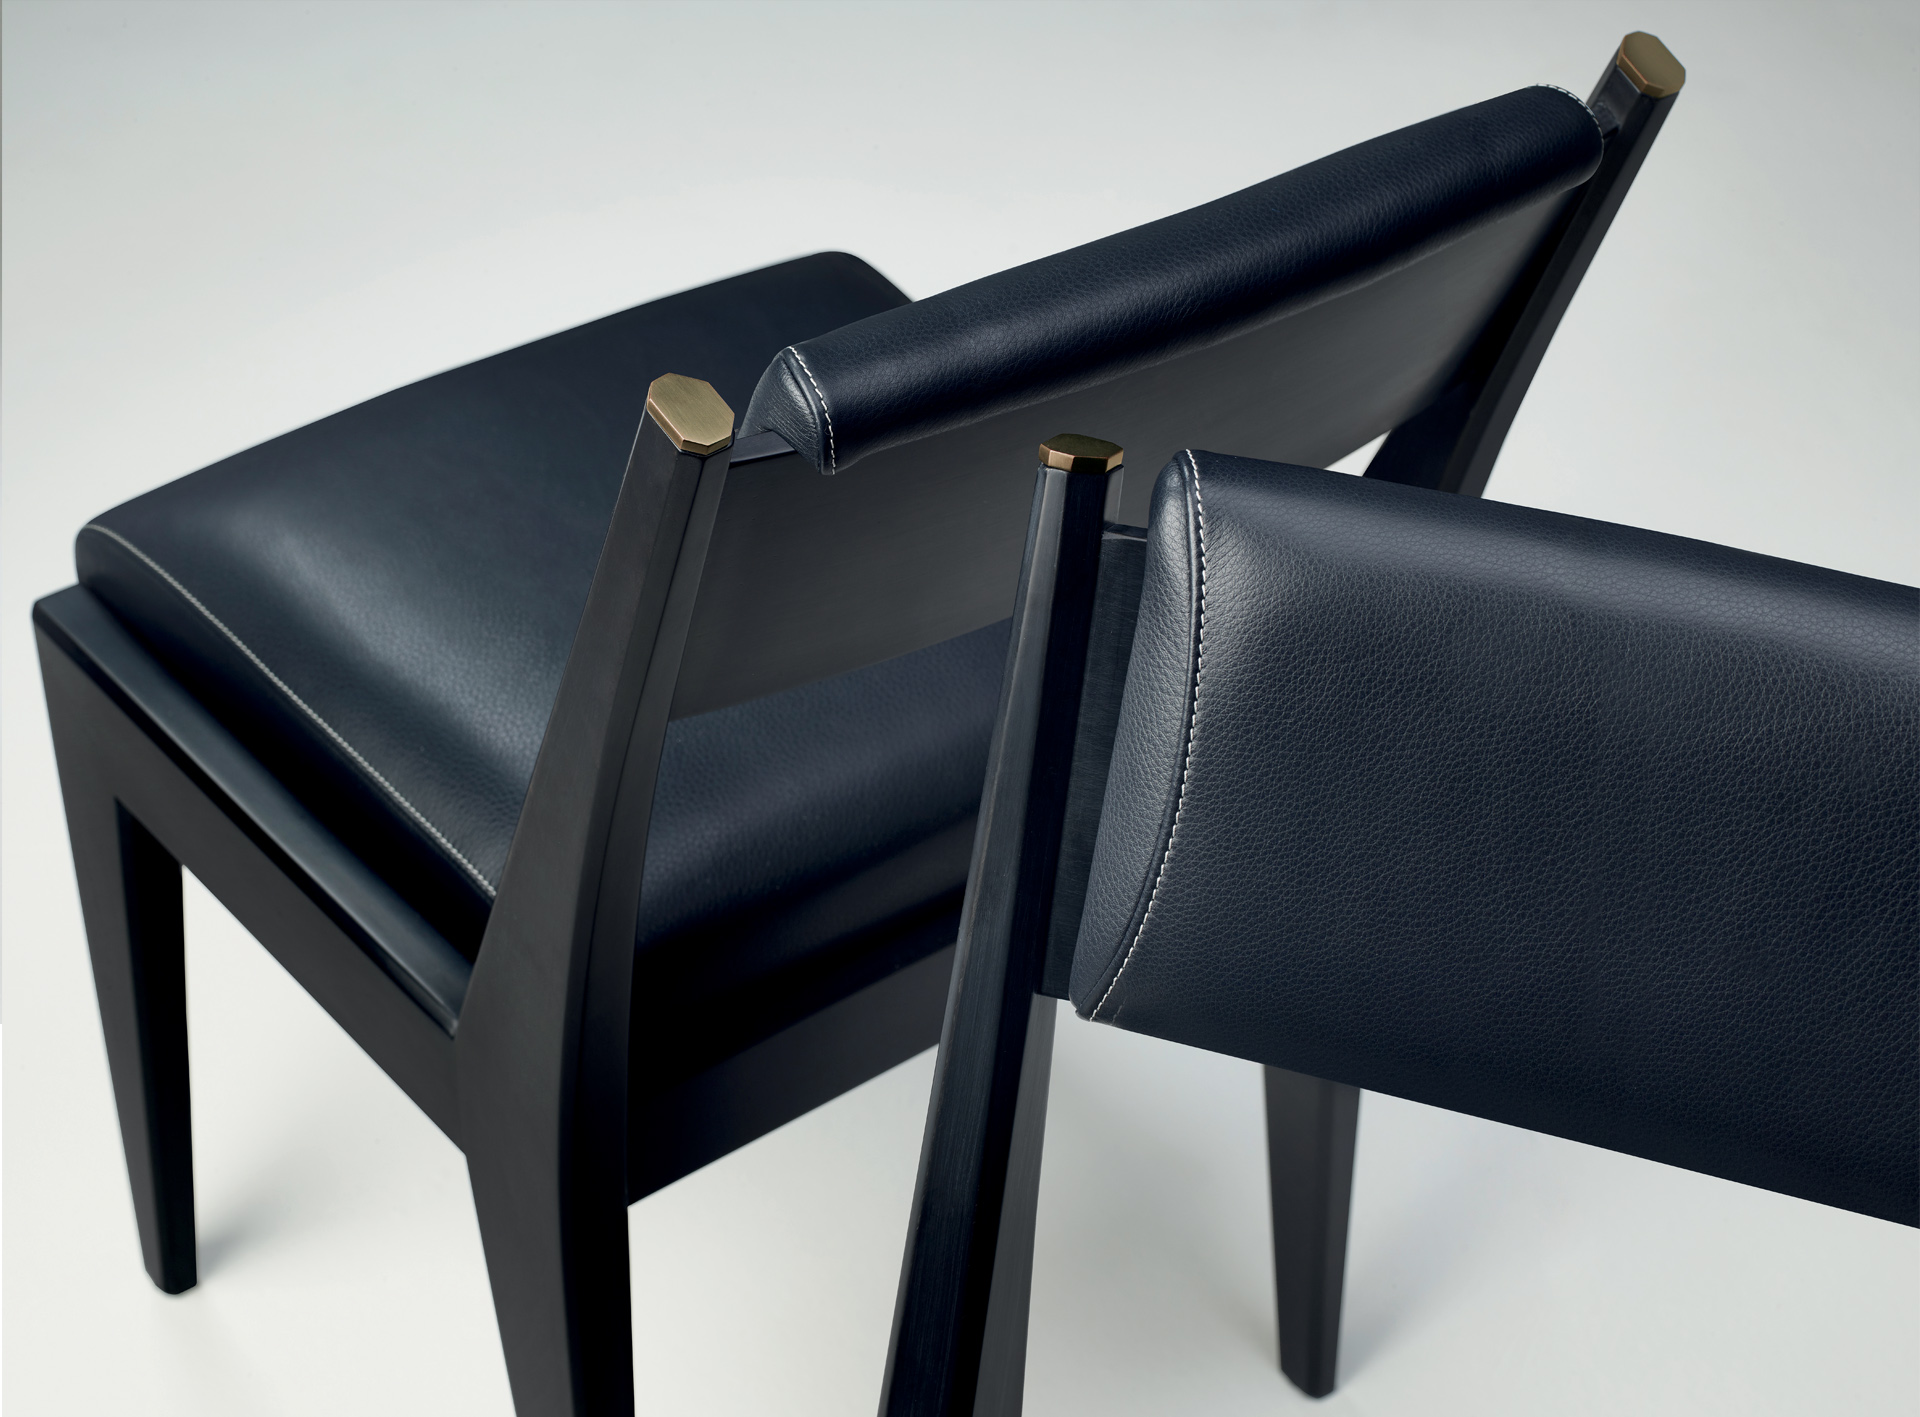 Iris is a wooden chair with bronze details and leather cushions, from Promemoria's Indigo Tales | Promemoria